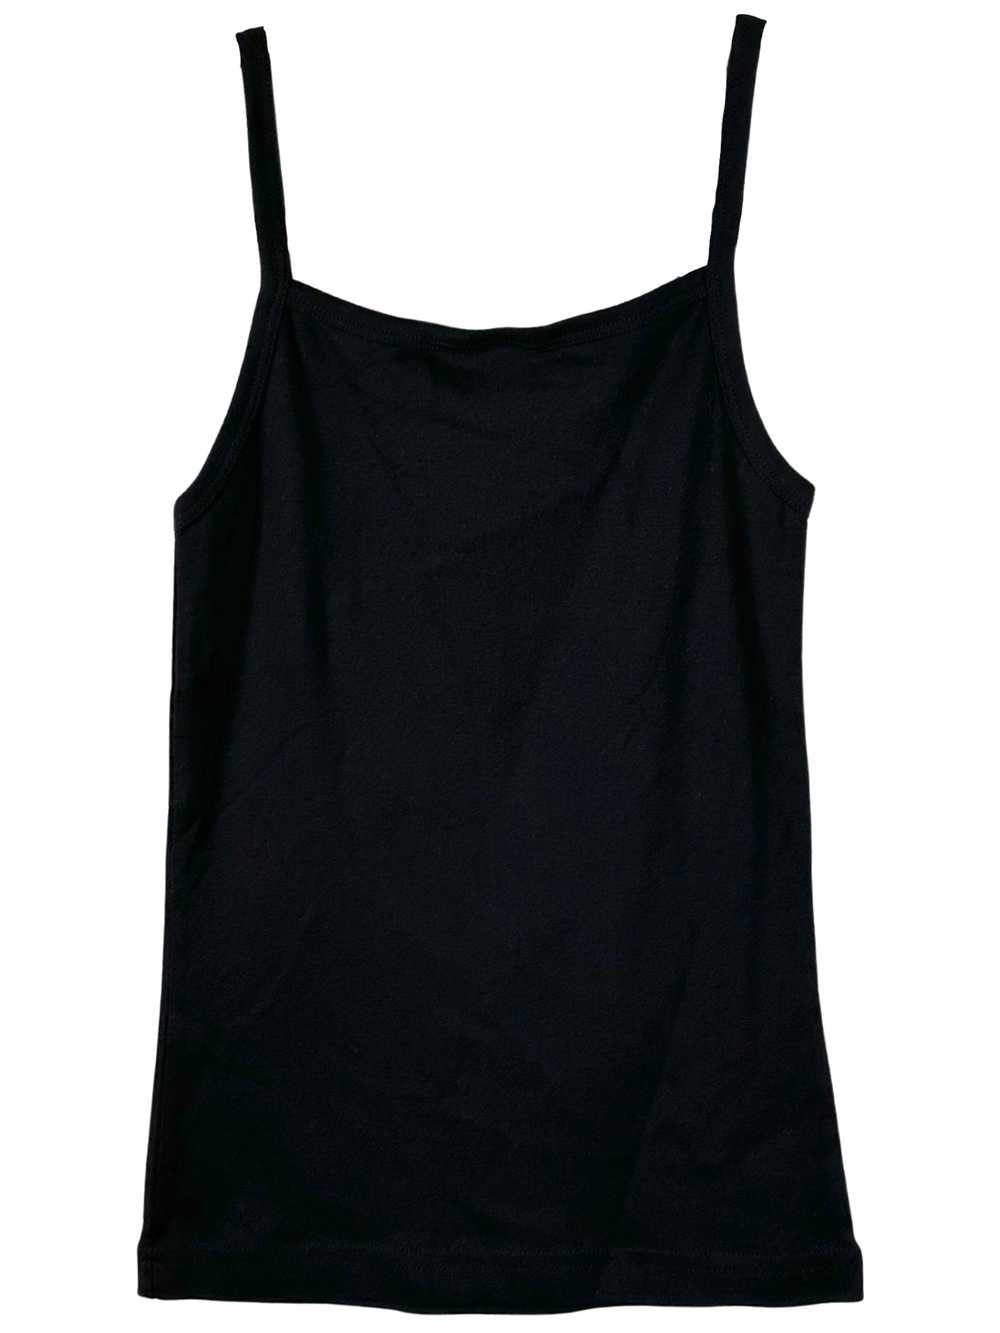 Vintage 1990s NYC Black and Blue Tank - S - image 3